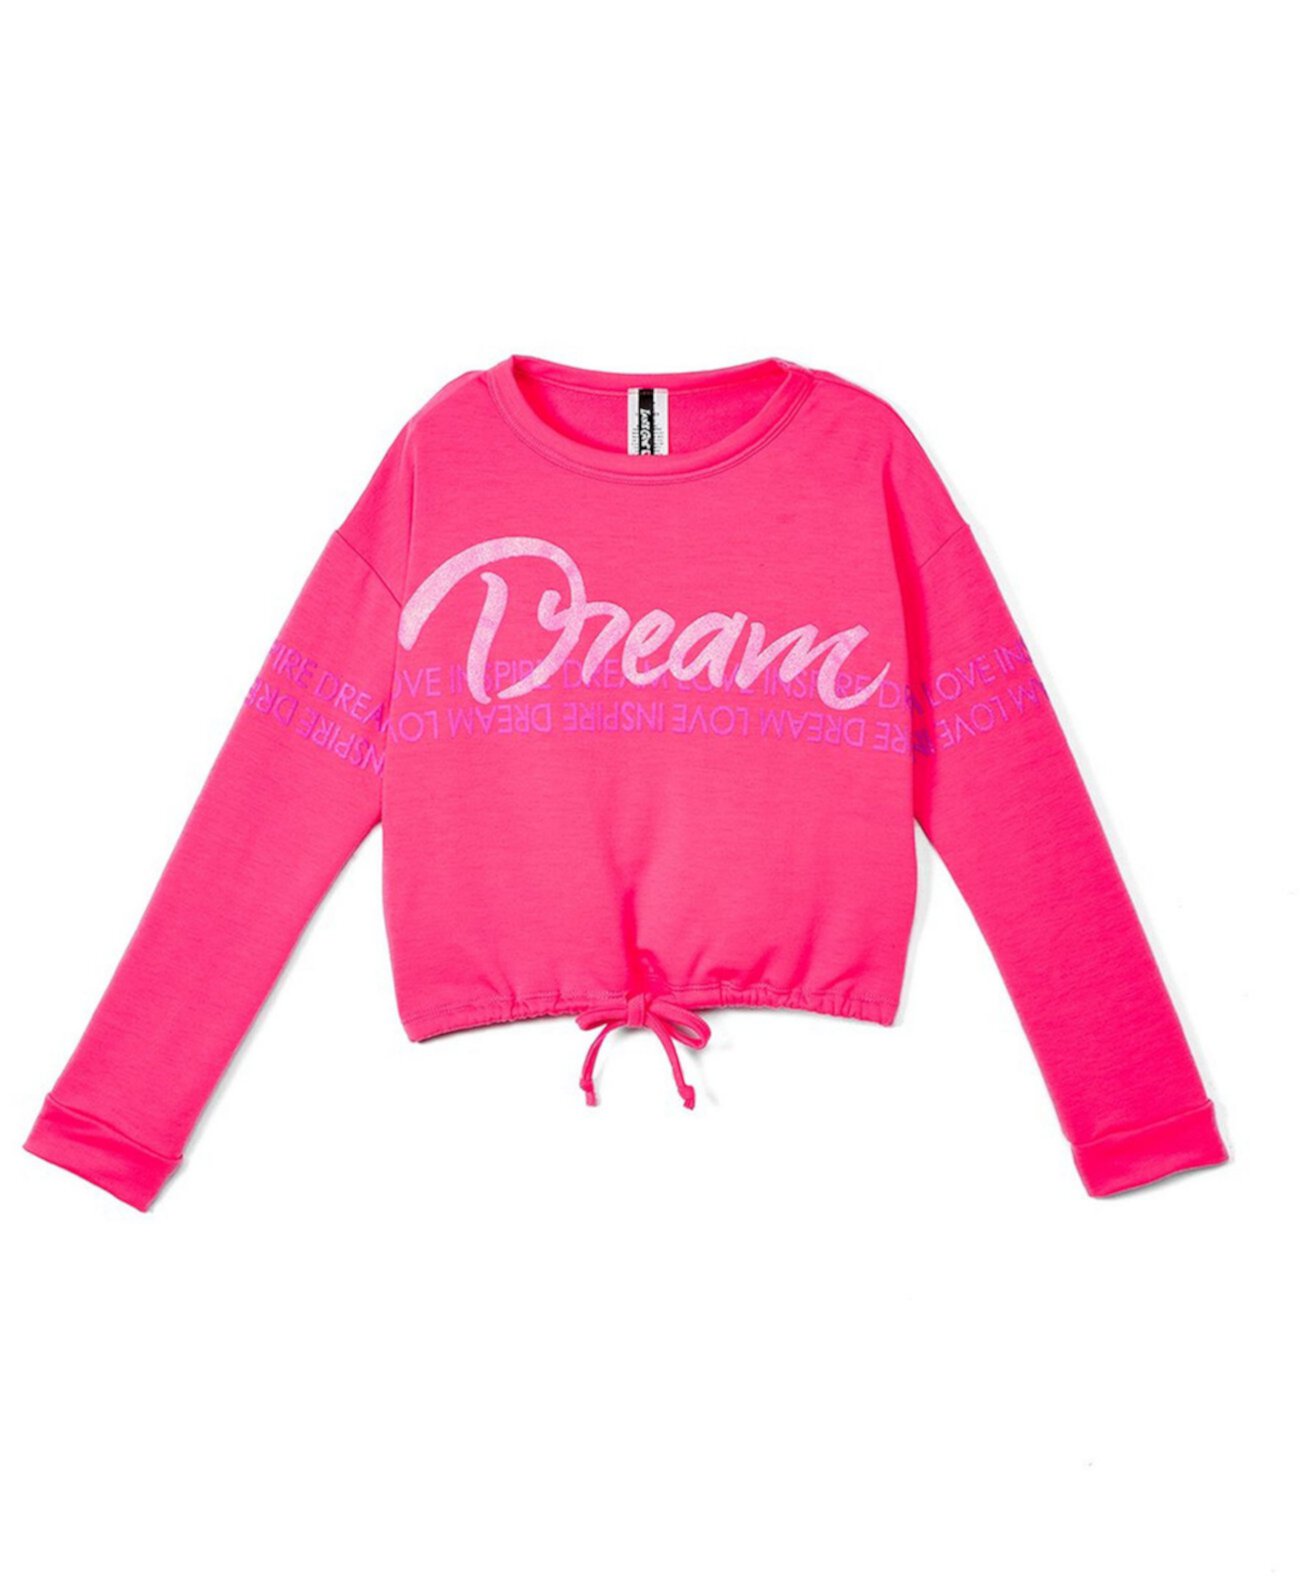 Big Girls Dream Long Sleeve Crew Neck Top One Step Up